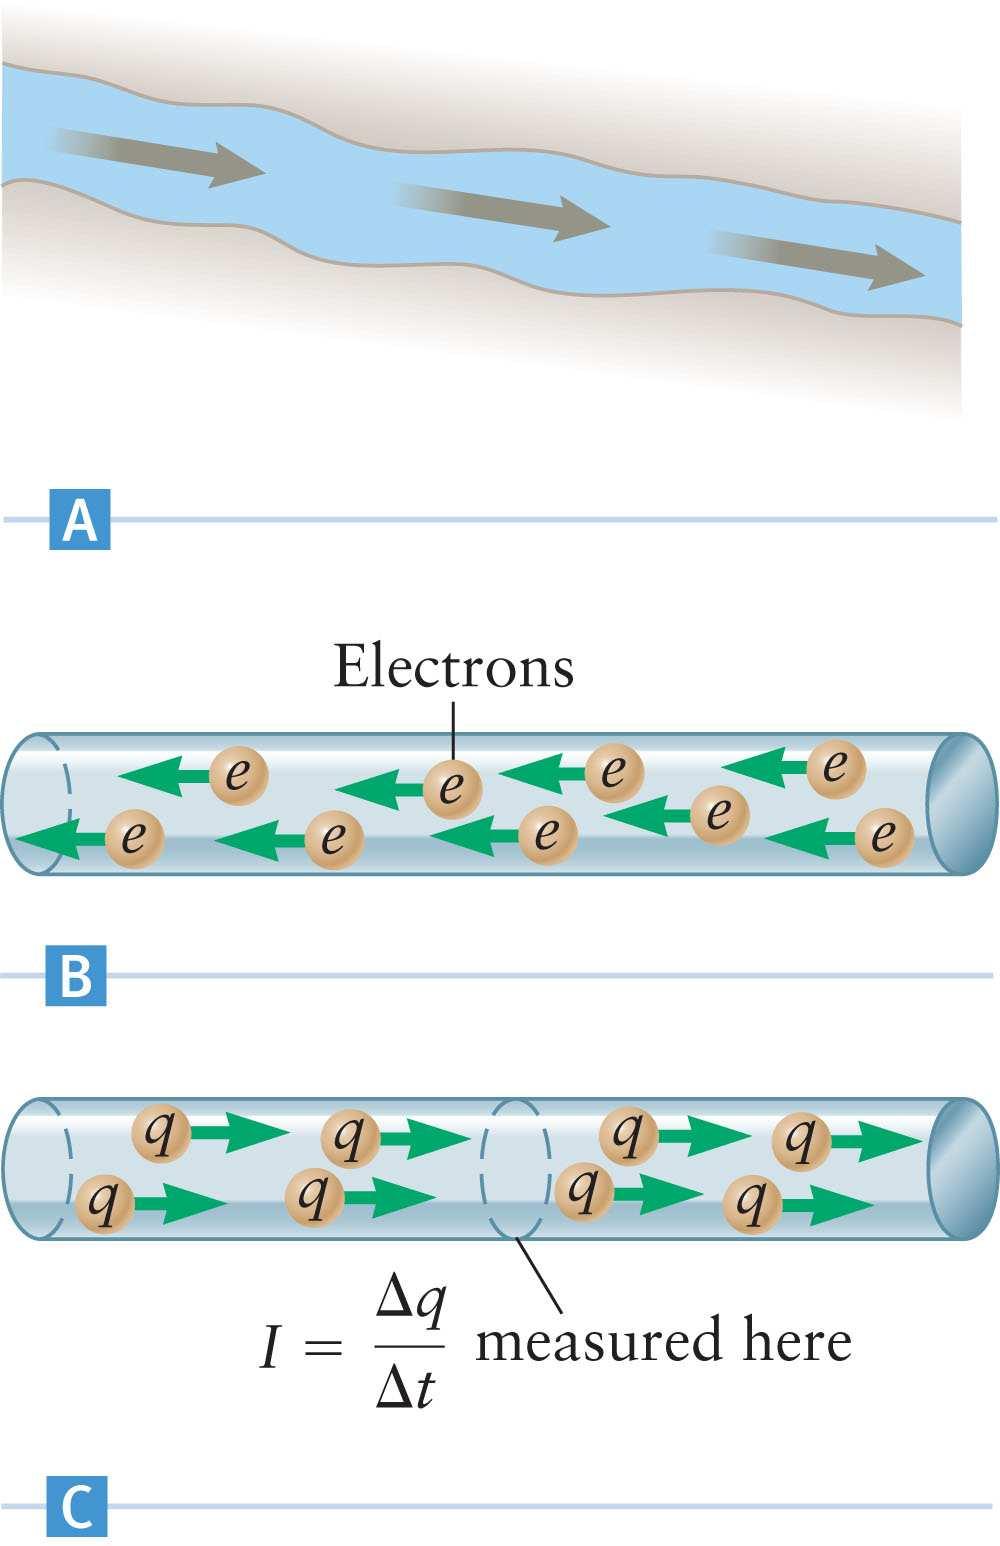 Power The motion of charges leads to the idea of electric circuits: current, I, in a wire is defined as the net amount of charge that passes through it